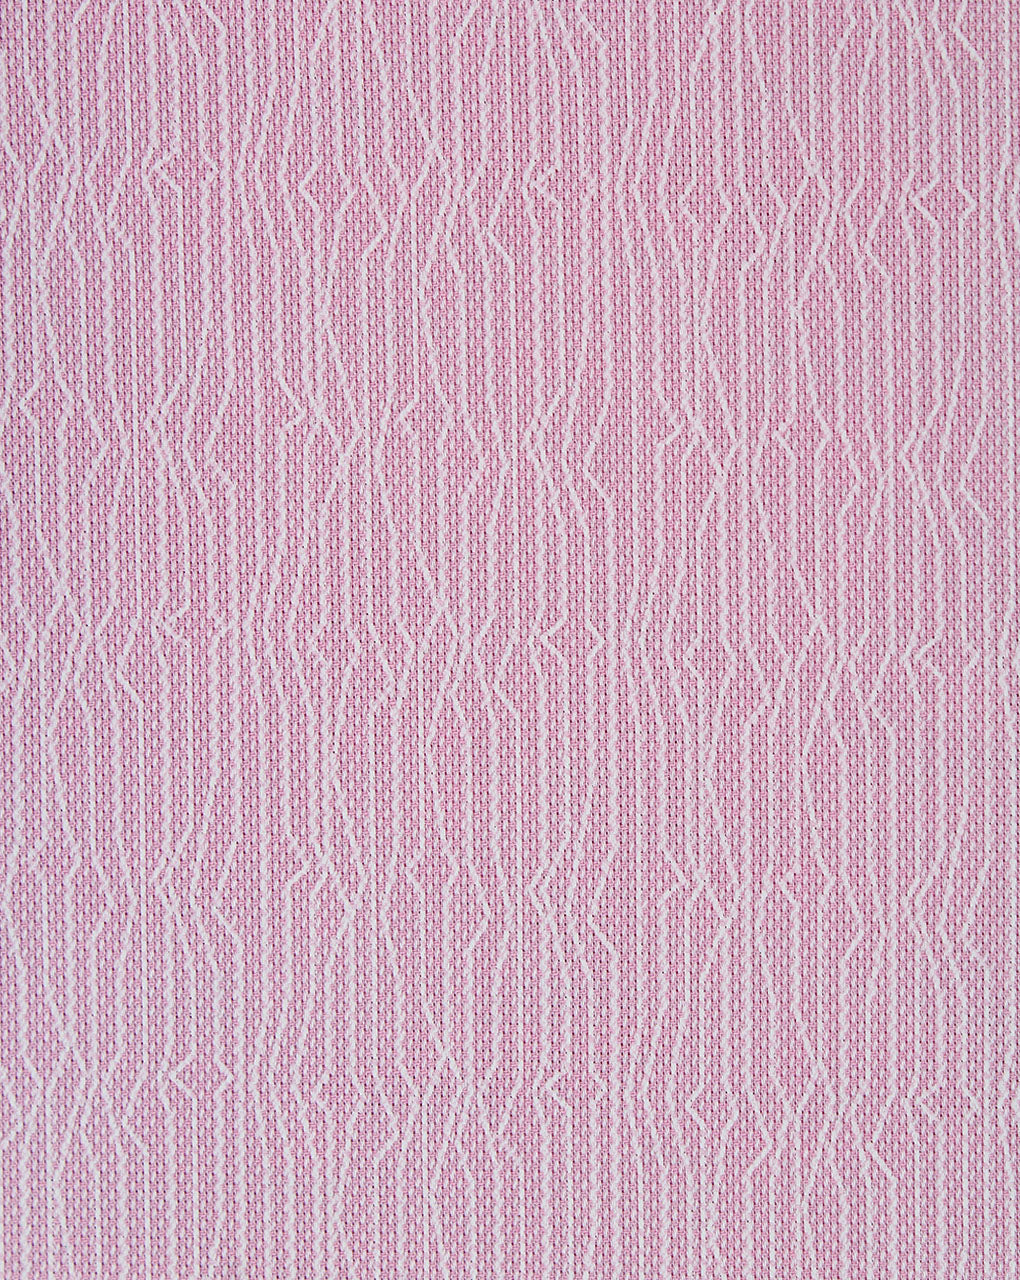 Hot Pink And White Abstract Design Cotton Print Fabric